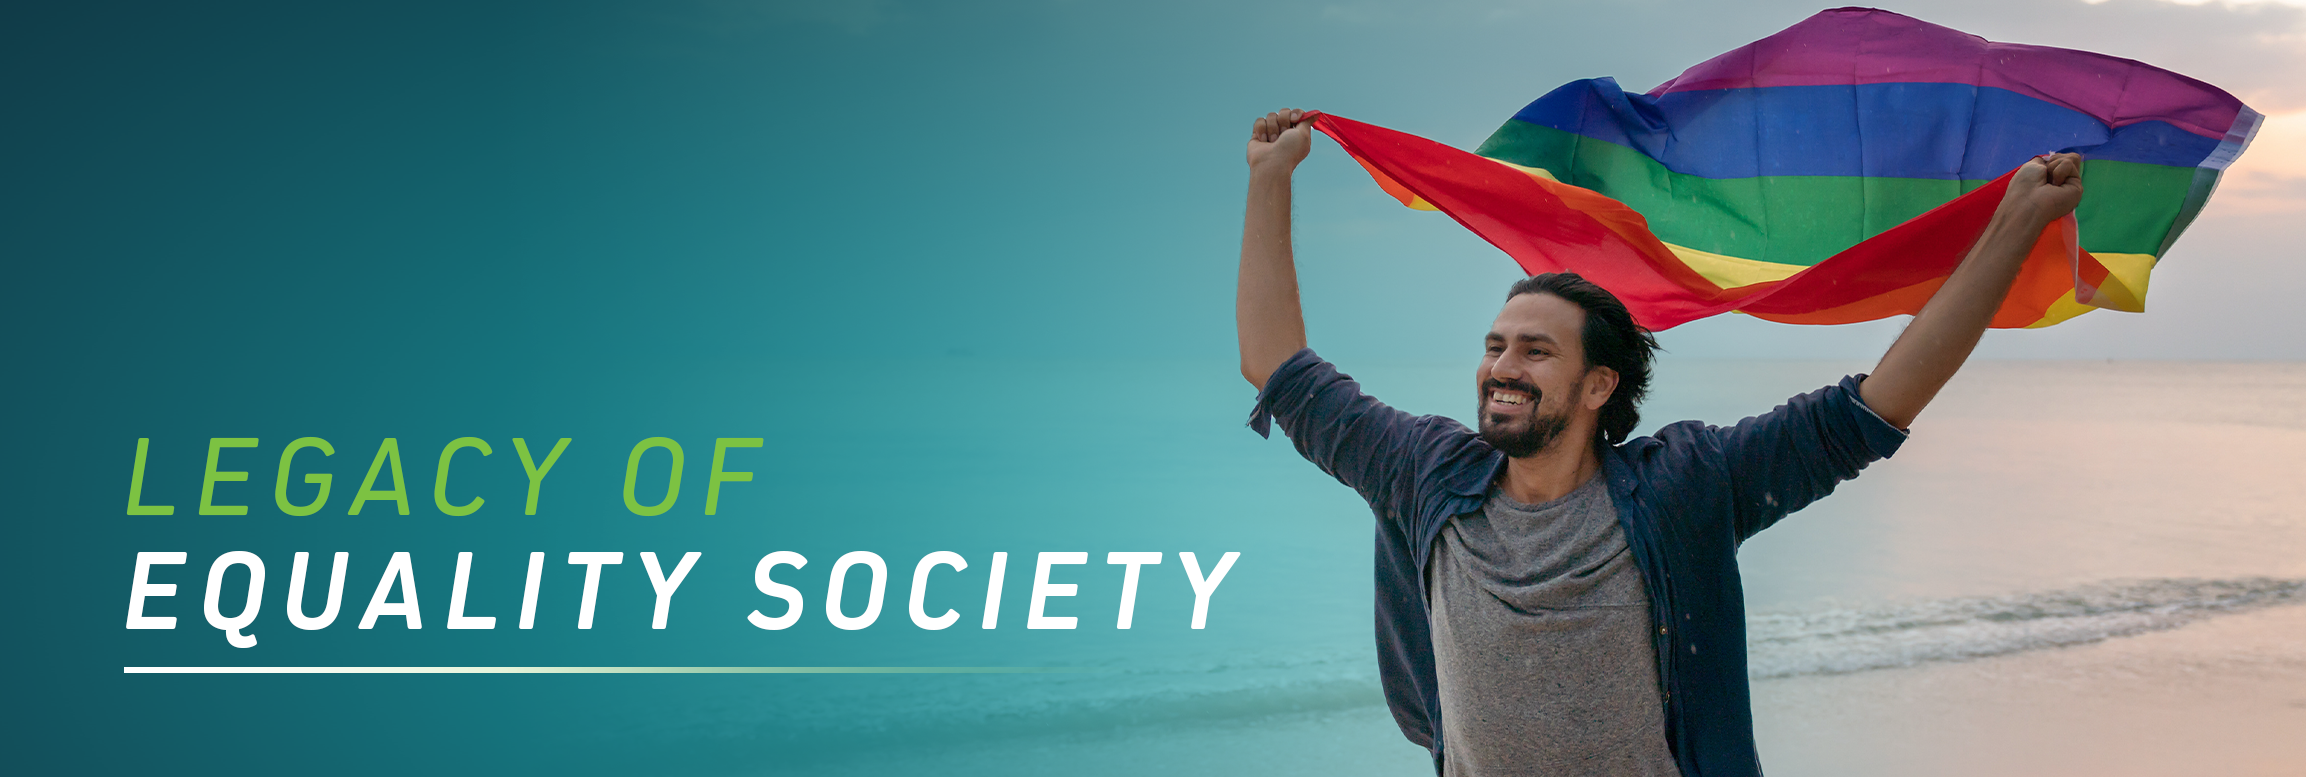 LEGACY_SOCIETY-banner.png